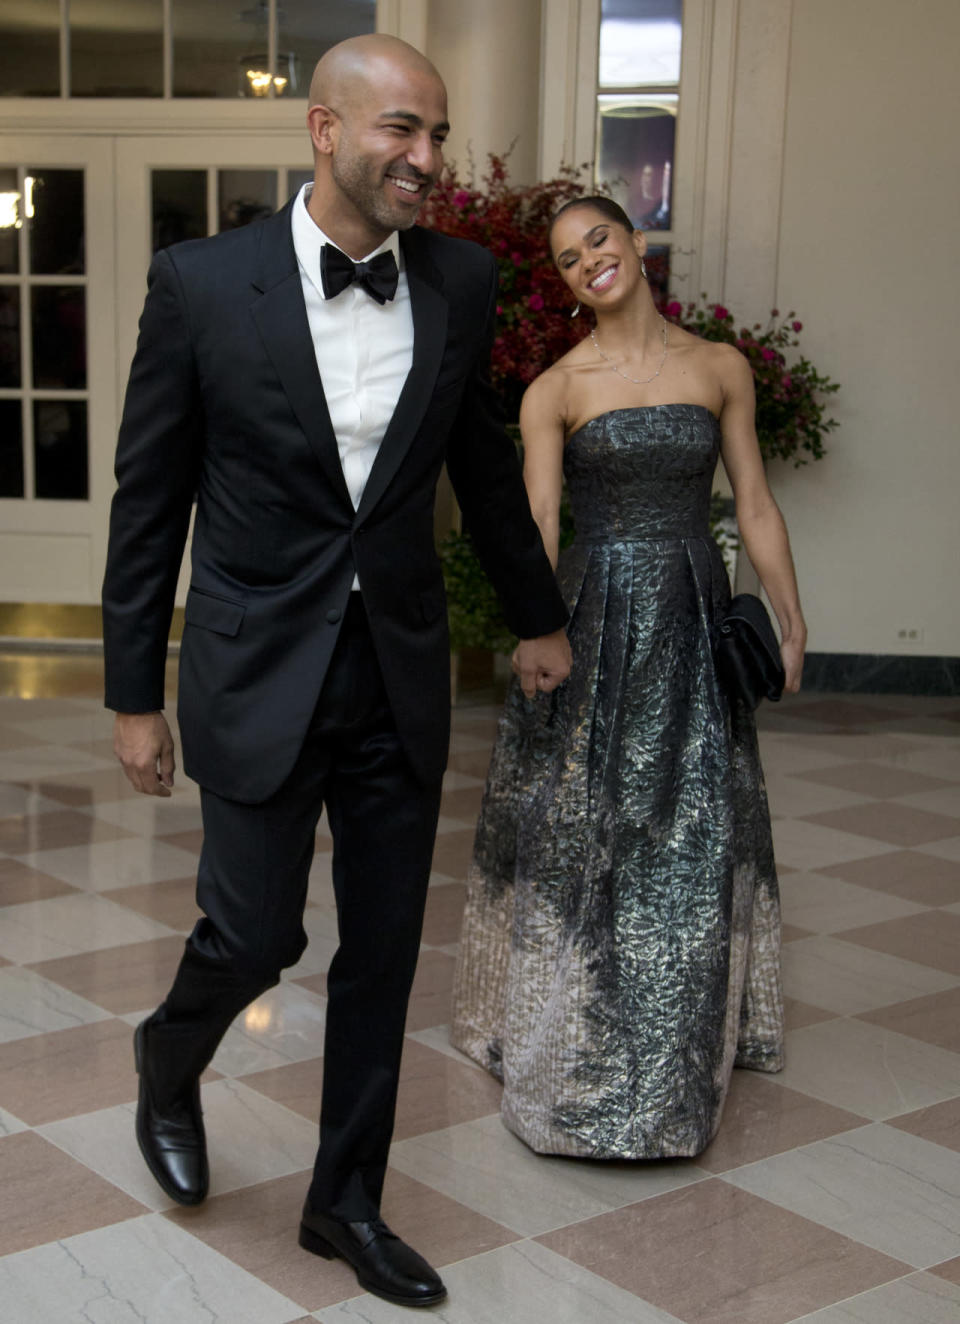 American Ballet Theatre Principal Dancer Misty Copeland and Olubayo Evans at the State Dinner in honor of Chinese President Xi Jinping, in the East Room of the White House in Washington, DC. 